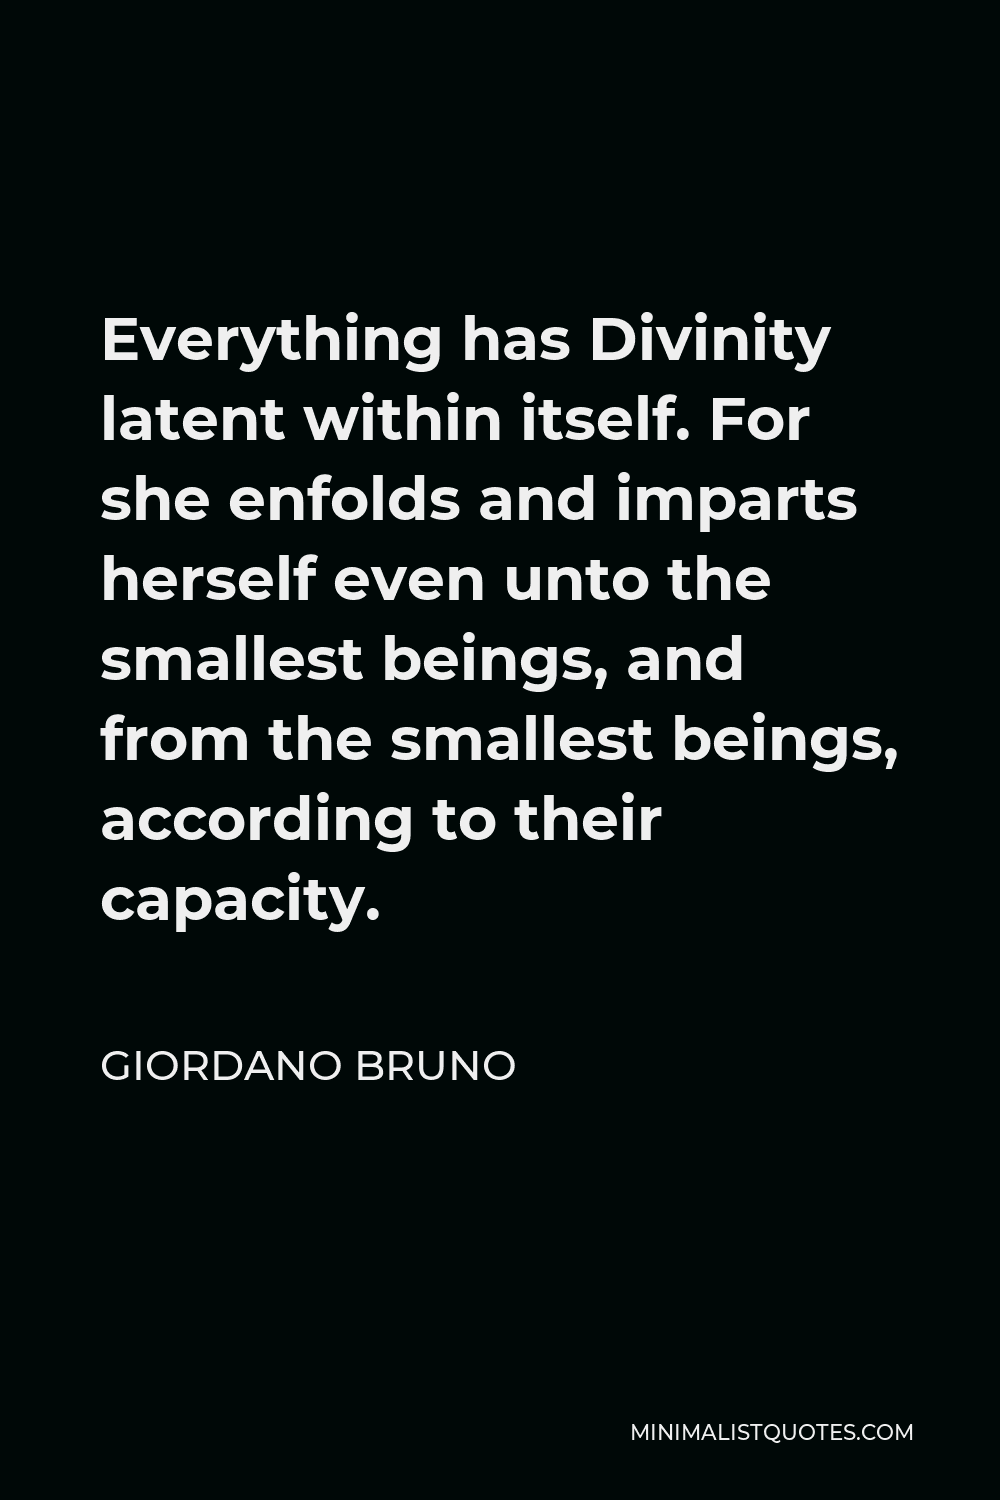 Giordano Bruno Quote - Everything has Divinity latent within itself. For she enfolds and imparts herself even unto the smallest beings, and from the smallest beings, according to their capacity.